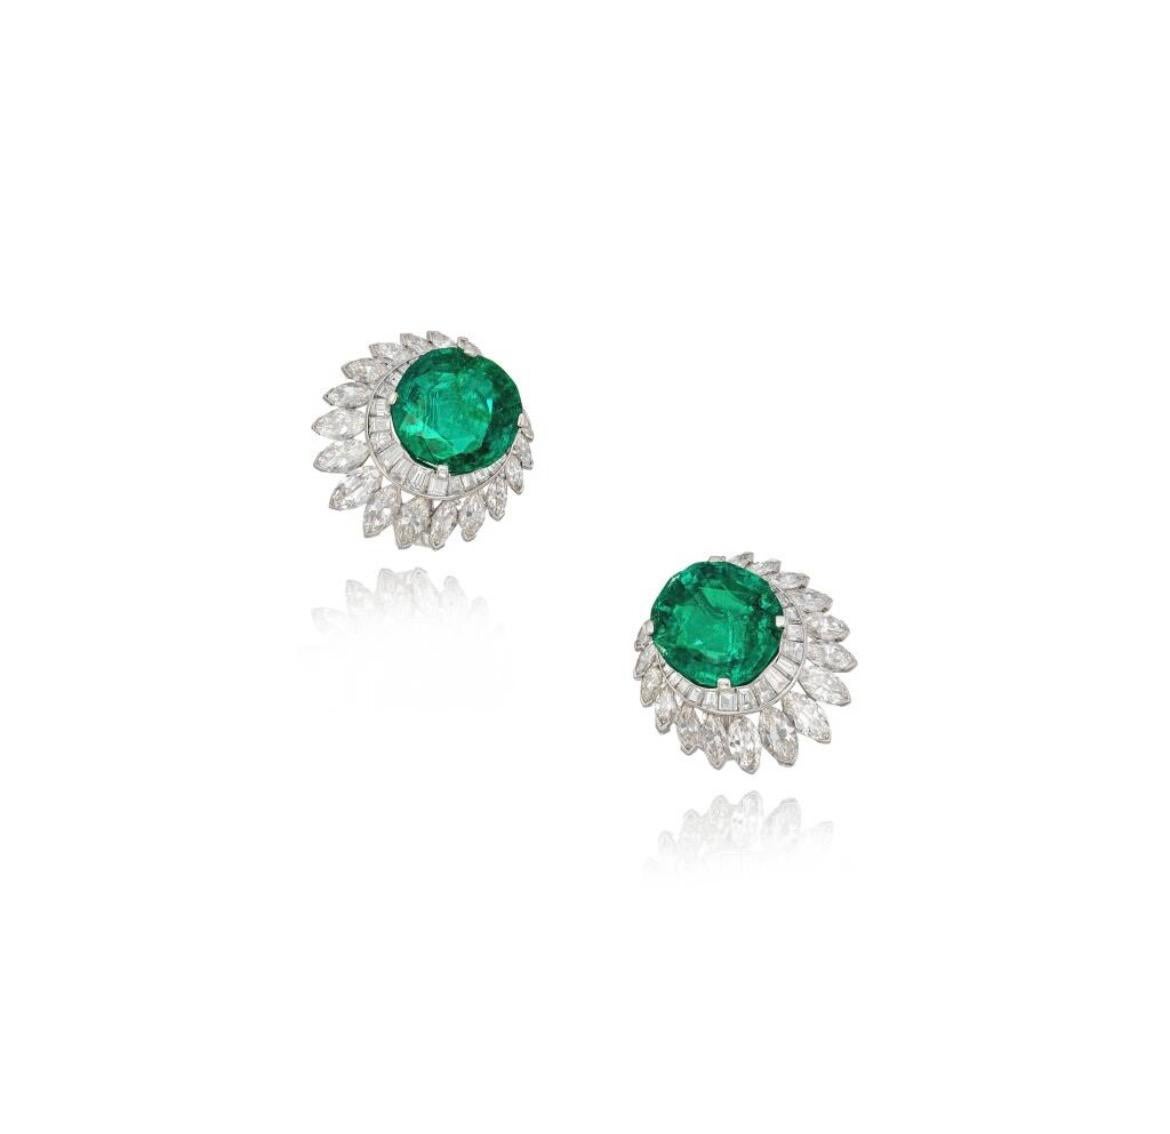 Gorgeous and lustrous Emerald and Diamond stud earrings in platinum, by Harry Winston.
The details are as follows :
Emeralds weighing 7.32 carats and 6.91 carats
Diamonds weighing a total of approx 6.05 carats ( FG color and VS clarity )
38 Baguette